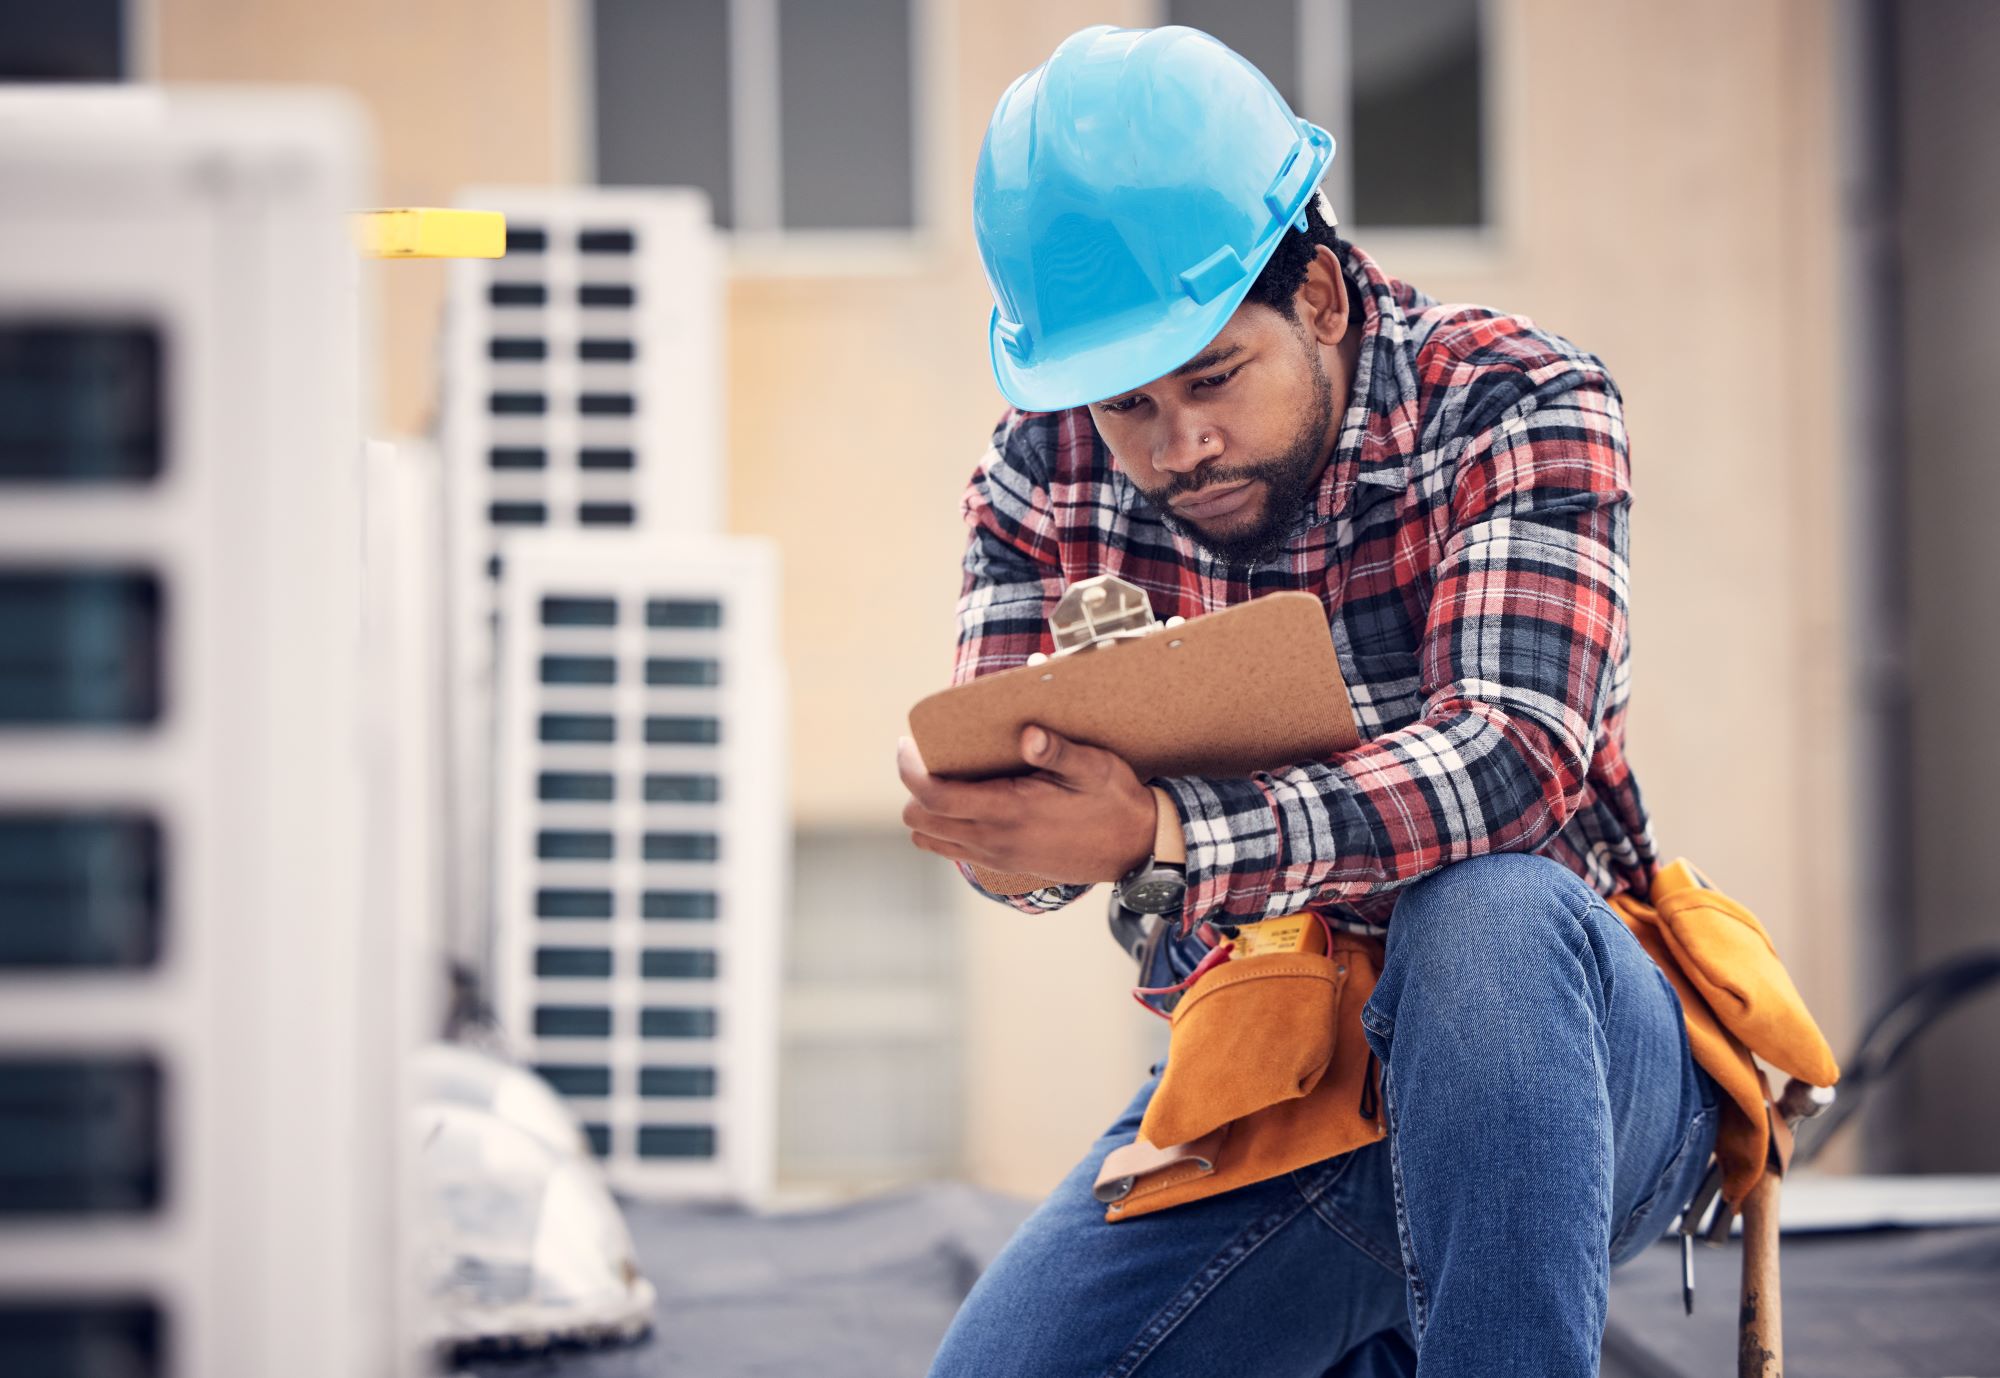 A Homeowner’s Guide To HVAC System Inspection